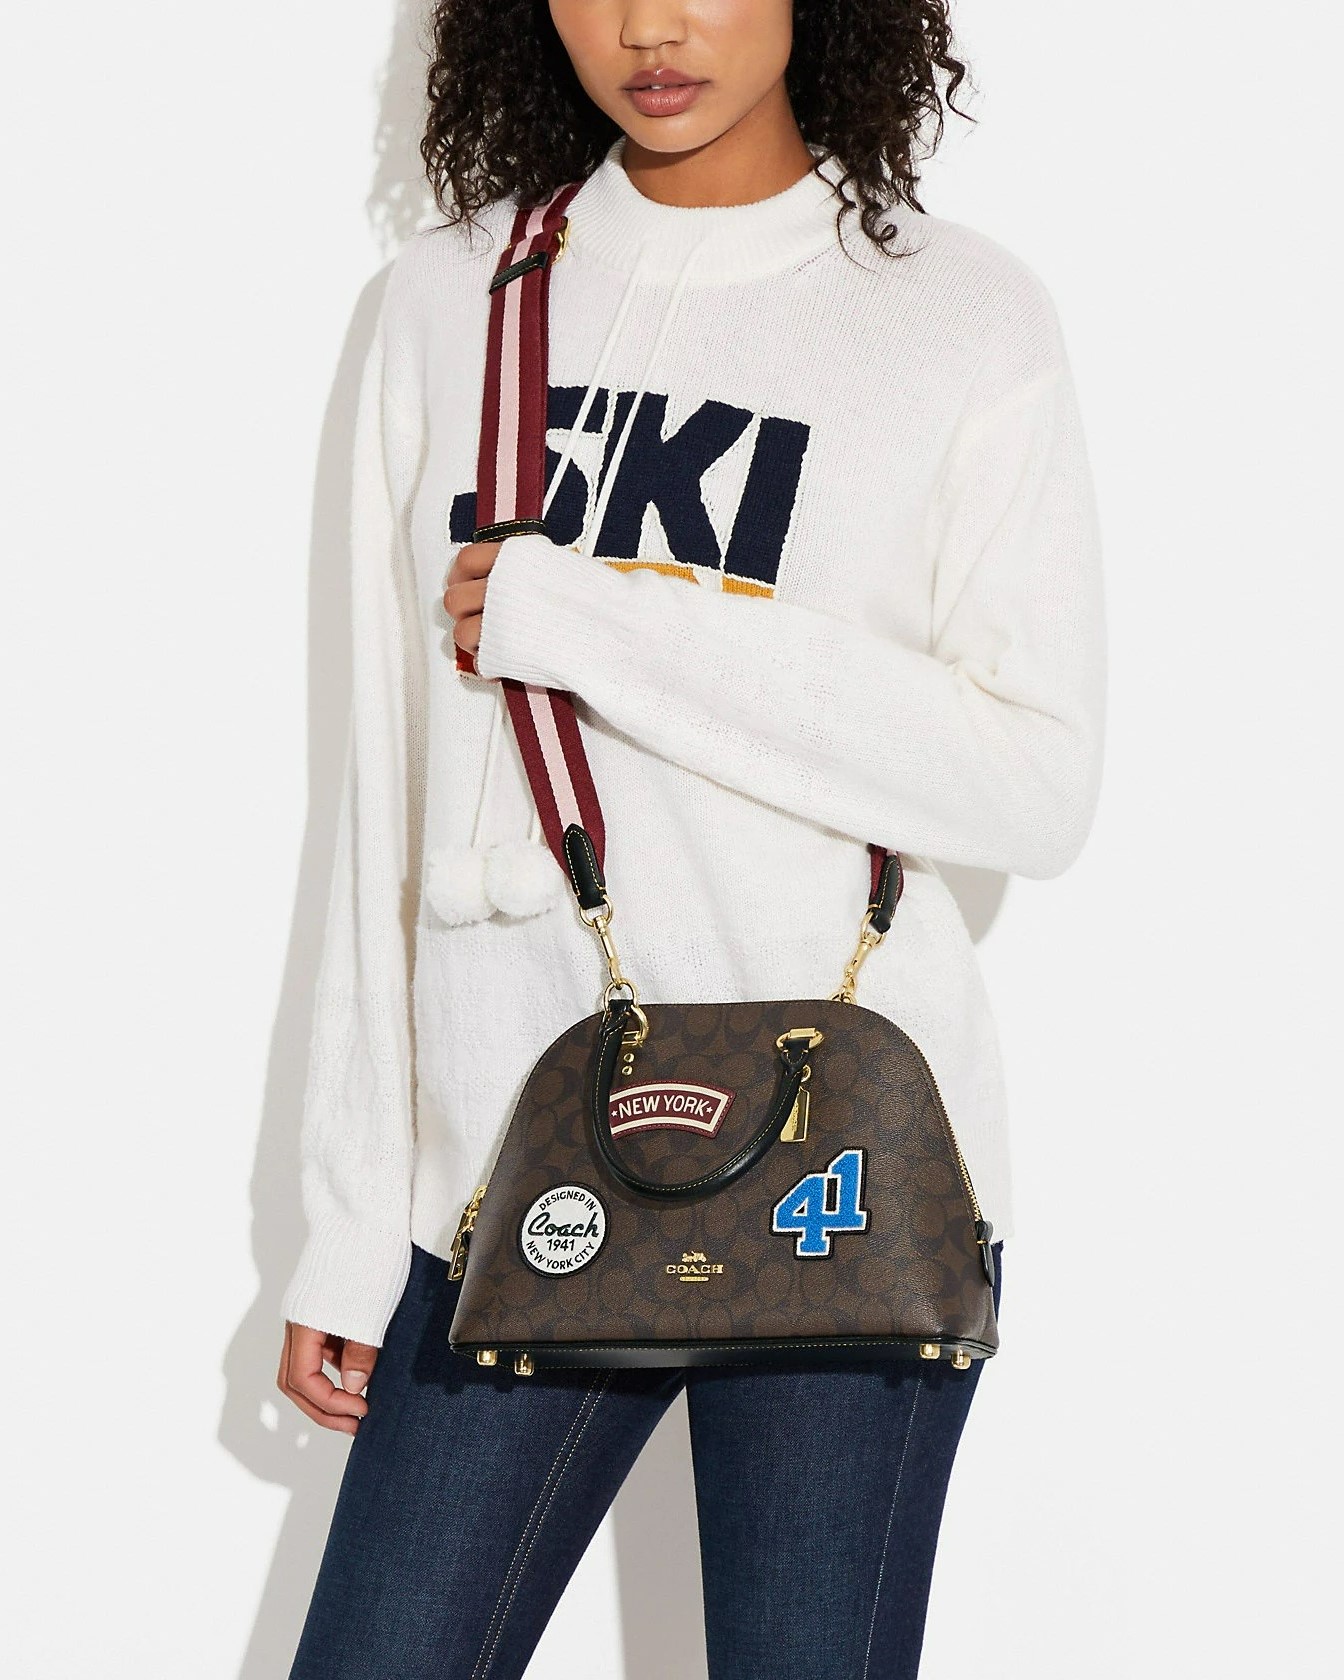 TÚI ĐEO CHÉO COACH HẾN NỮ KATY SATCHEL IN SIGNATURE CANVAS WITH SKI PATCHES 6